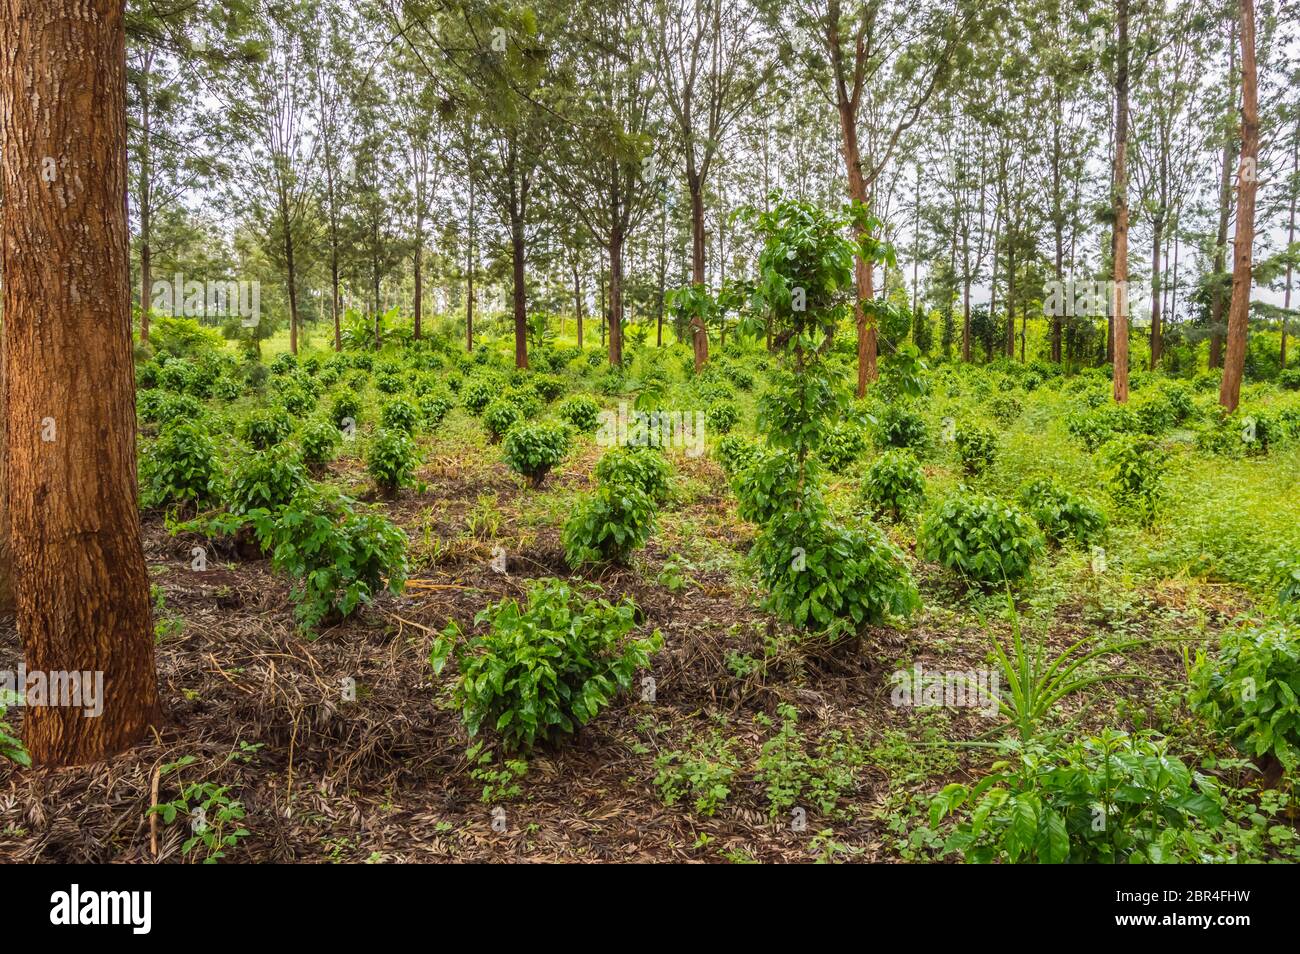 Young coffee plantations between rows of Thika trees in central Kenya Stock Photo